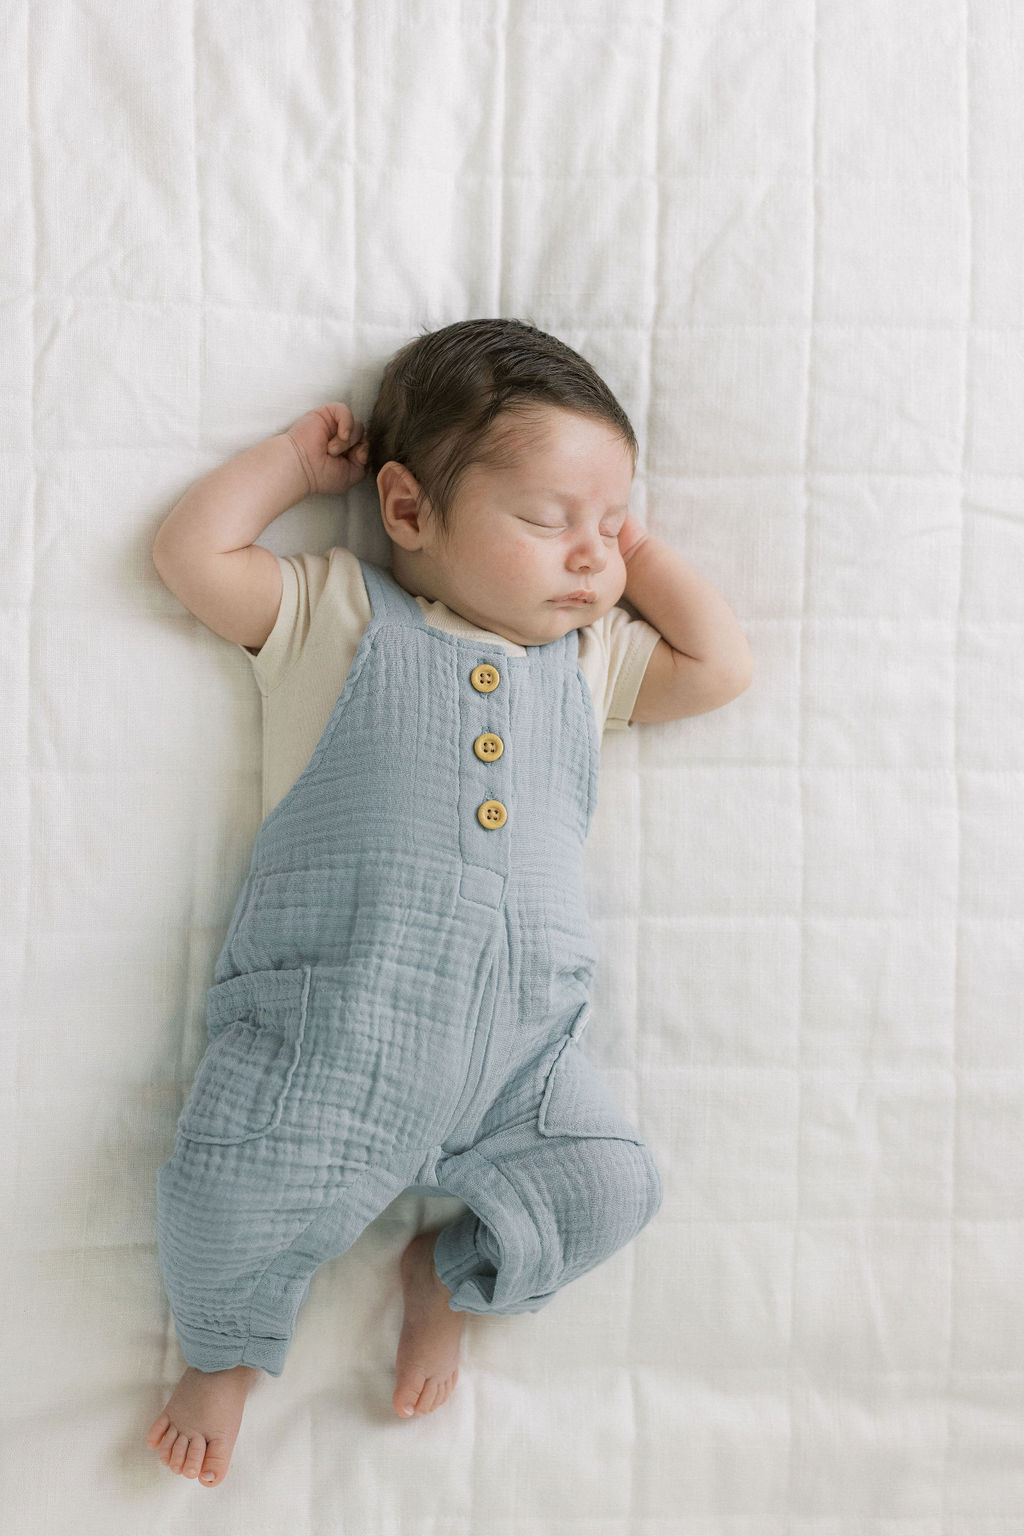 A newborn baby sleeps in blue suspenders on a white bed mommy and me classes nj